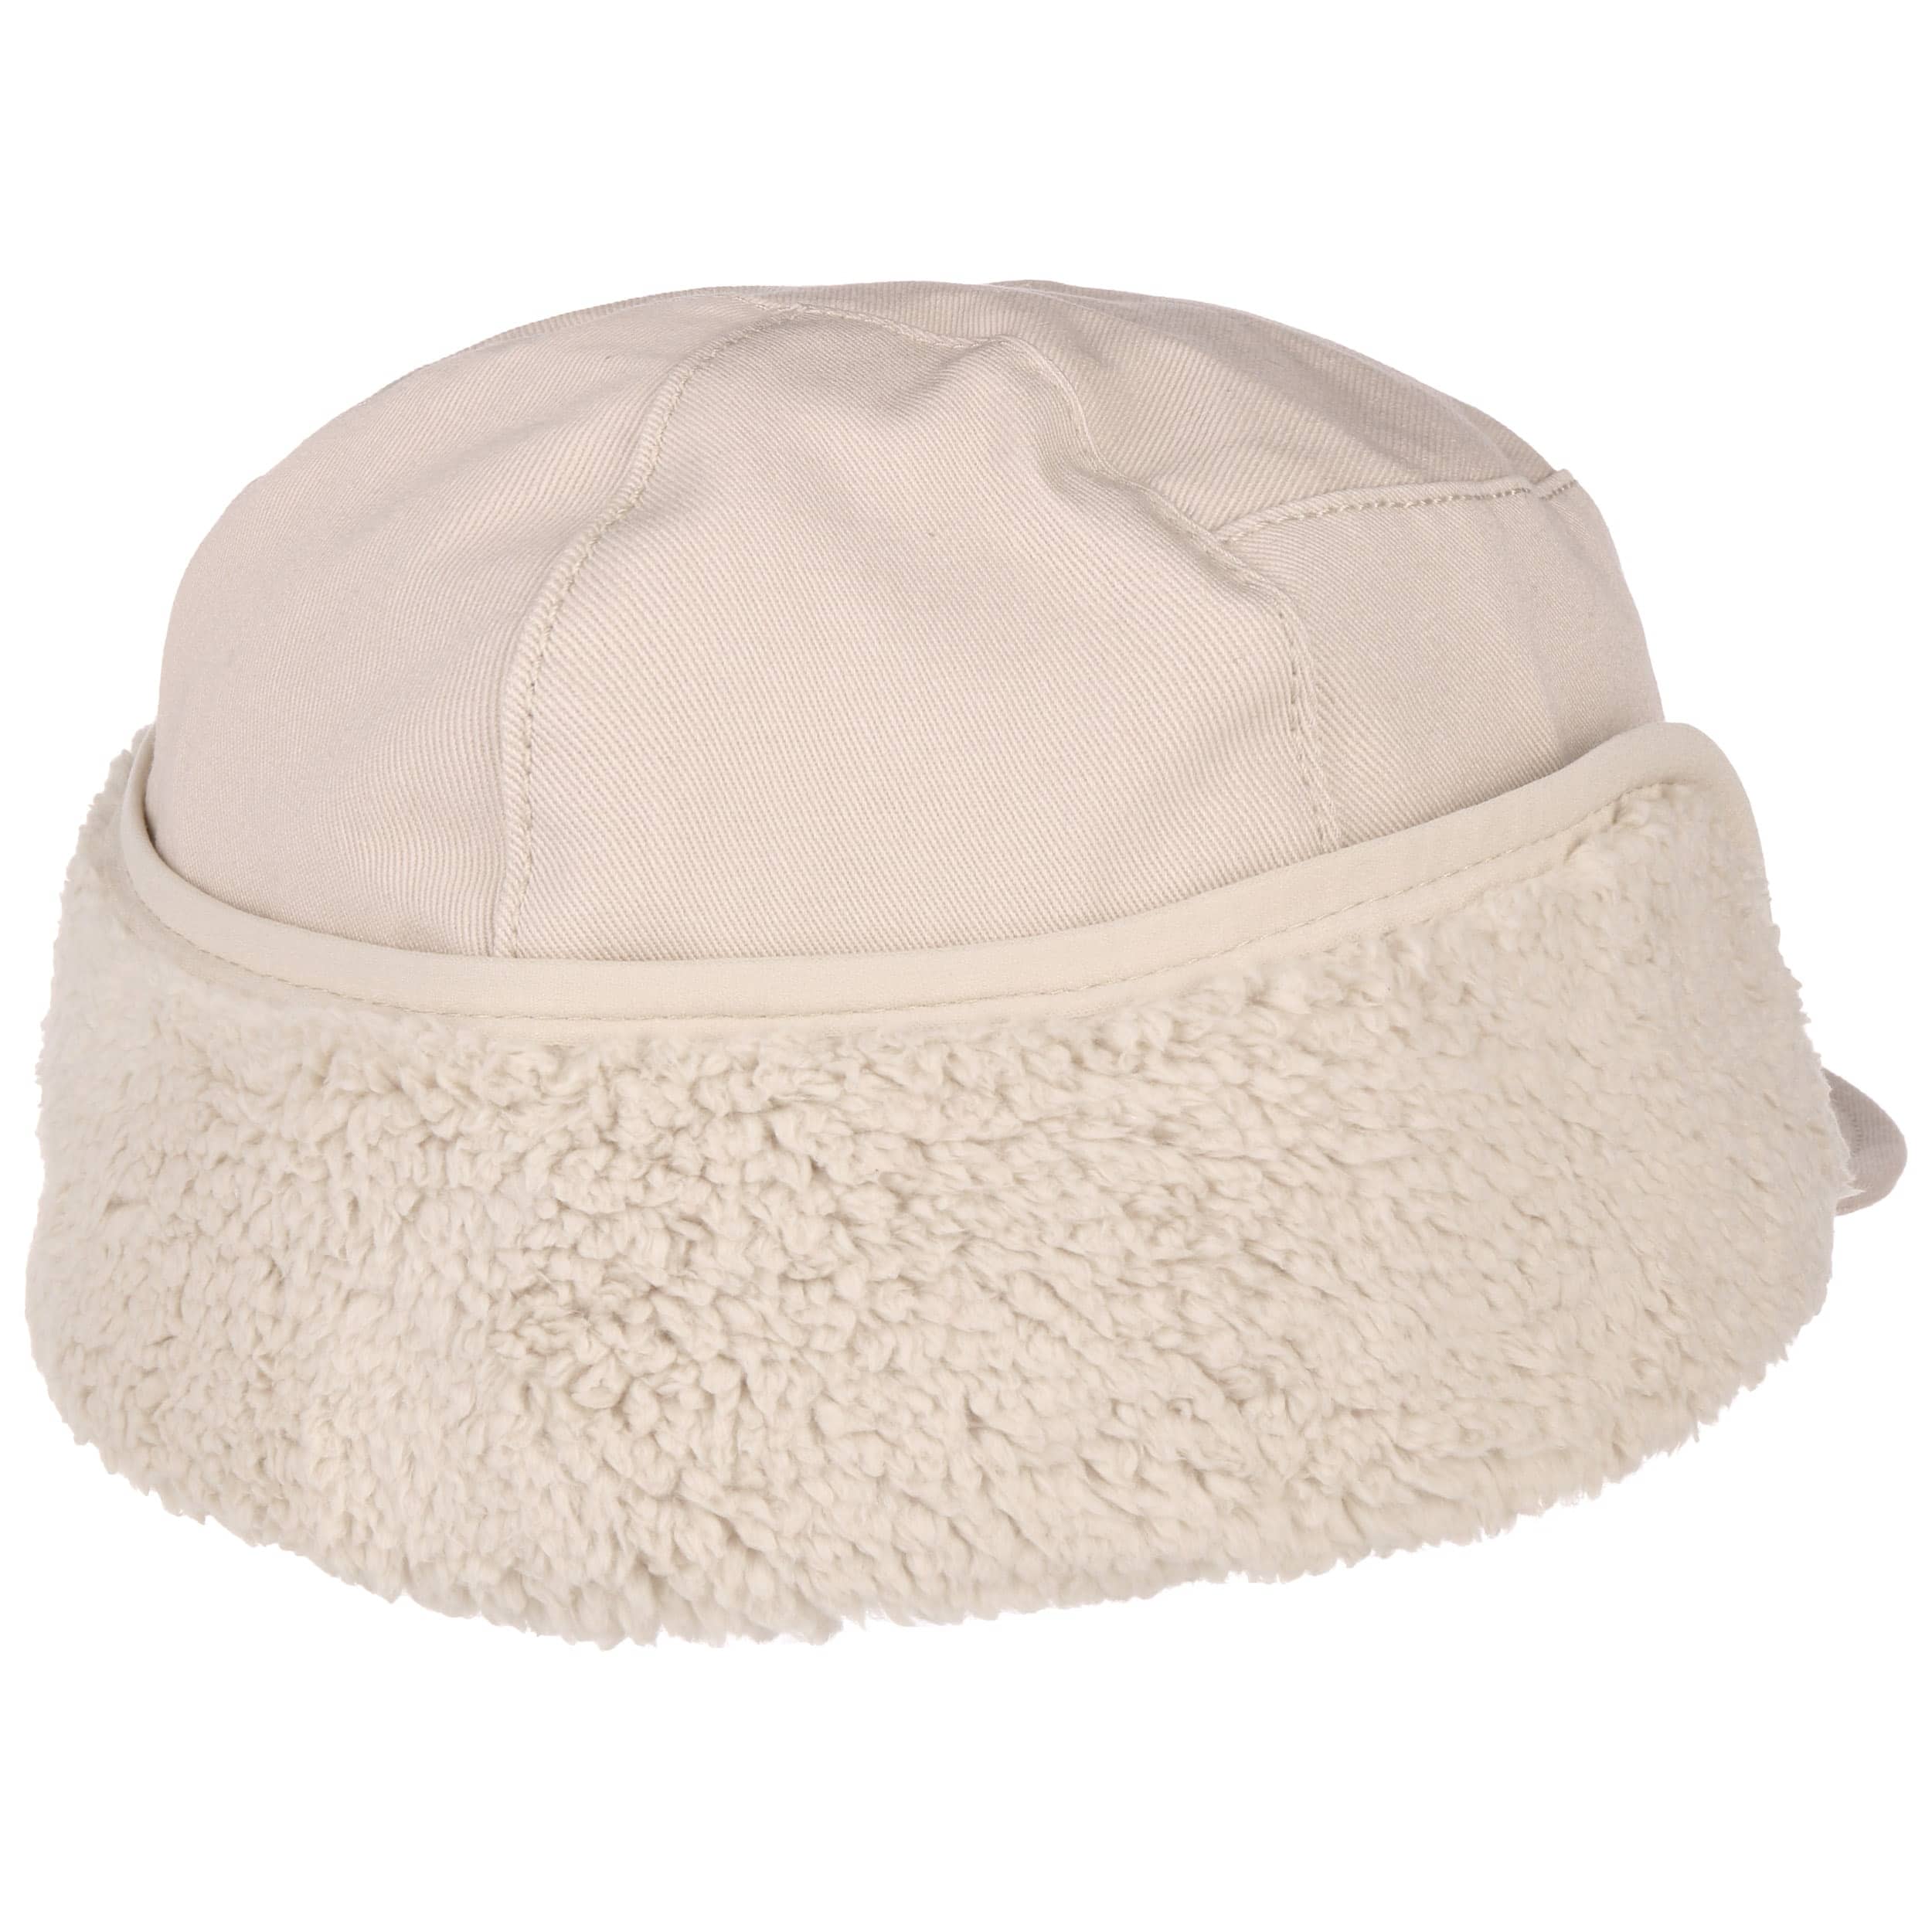 Campshire Ear Flap Cap by The North Face - 48,95